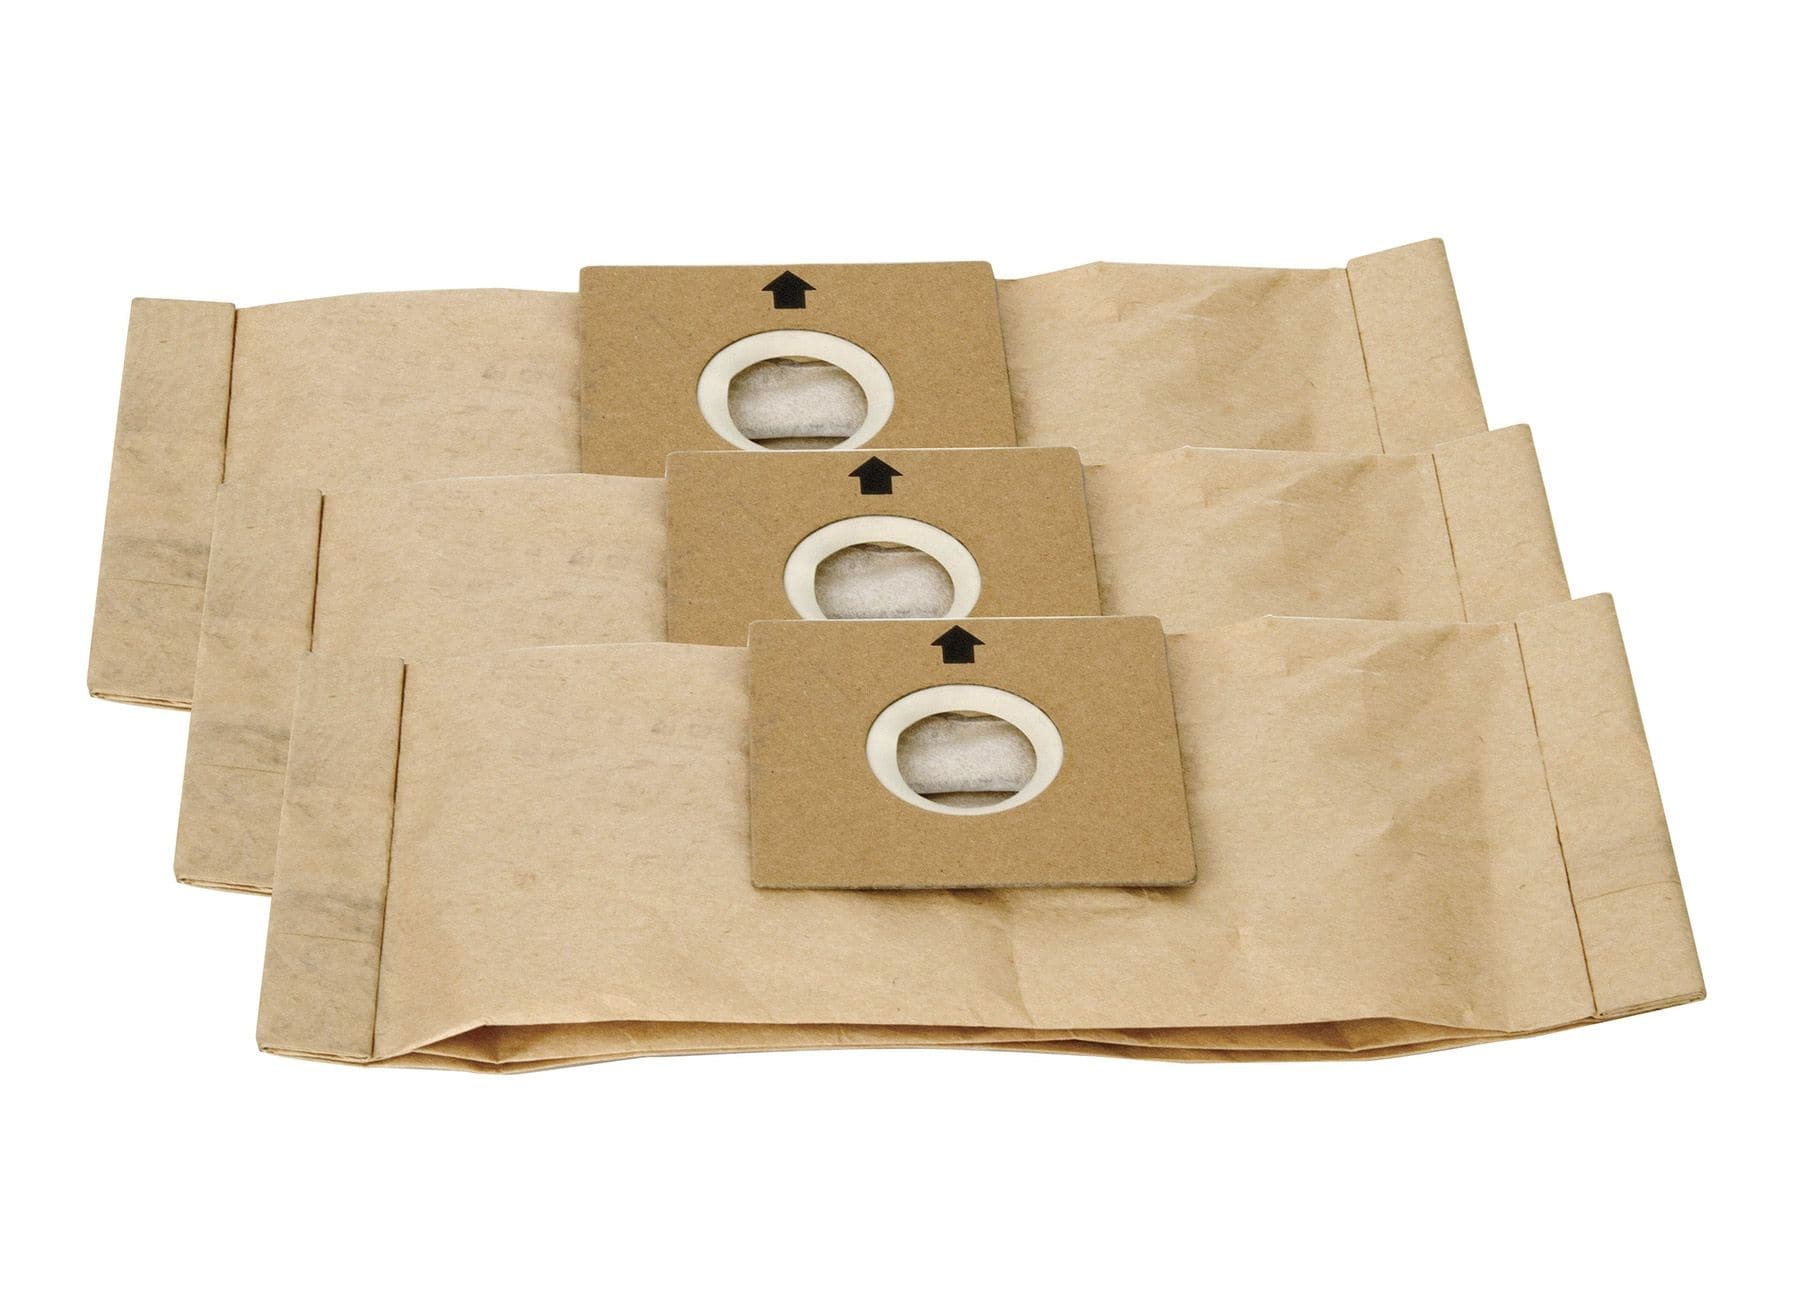 10 GE, Premier, Whirlwind, Everclean Swivel Top Canister Tank style Vacuum  Cleaner Sweeper Bags 1400 Vac, 405329, 1400ES, 1400, STR21339, 21339, C  series C-1 thru C-18, 815, V11C10, V11C13, V14C9 : Amazon.ca: Home